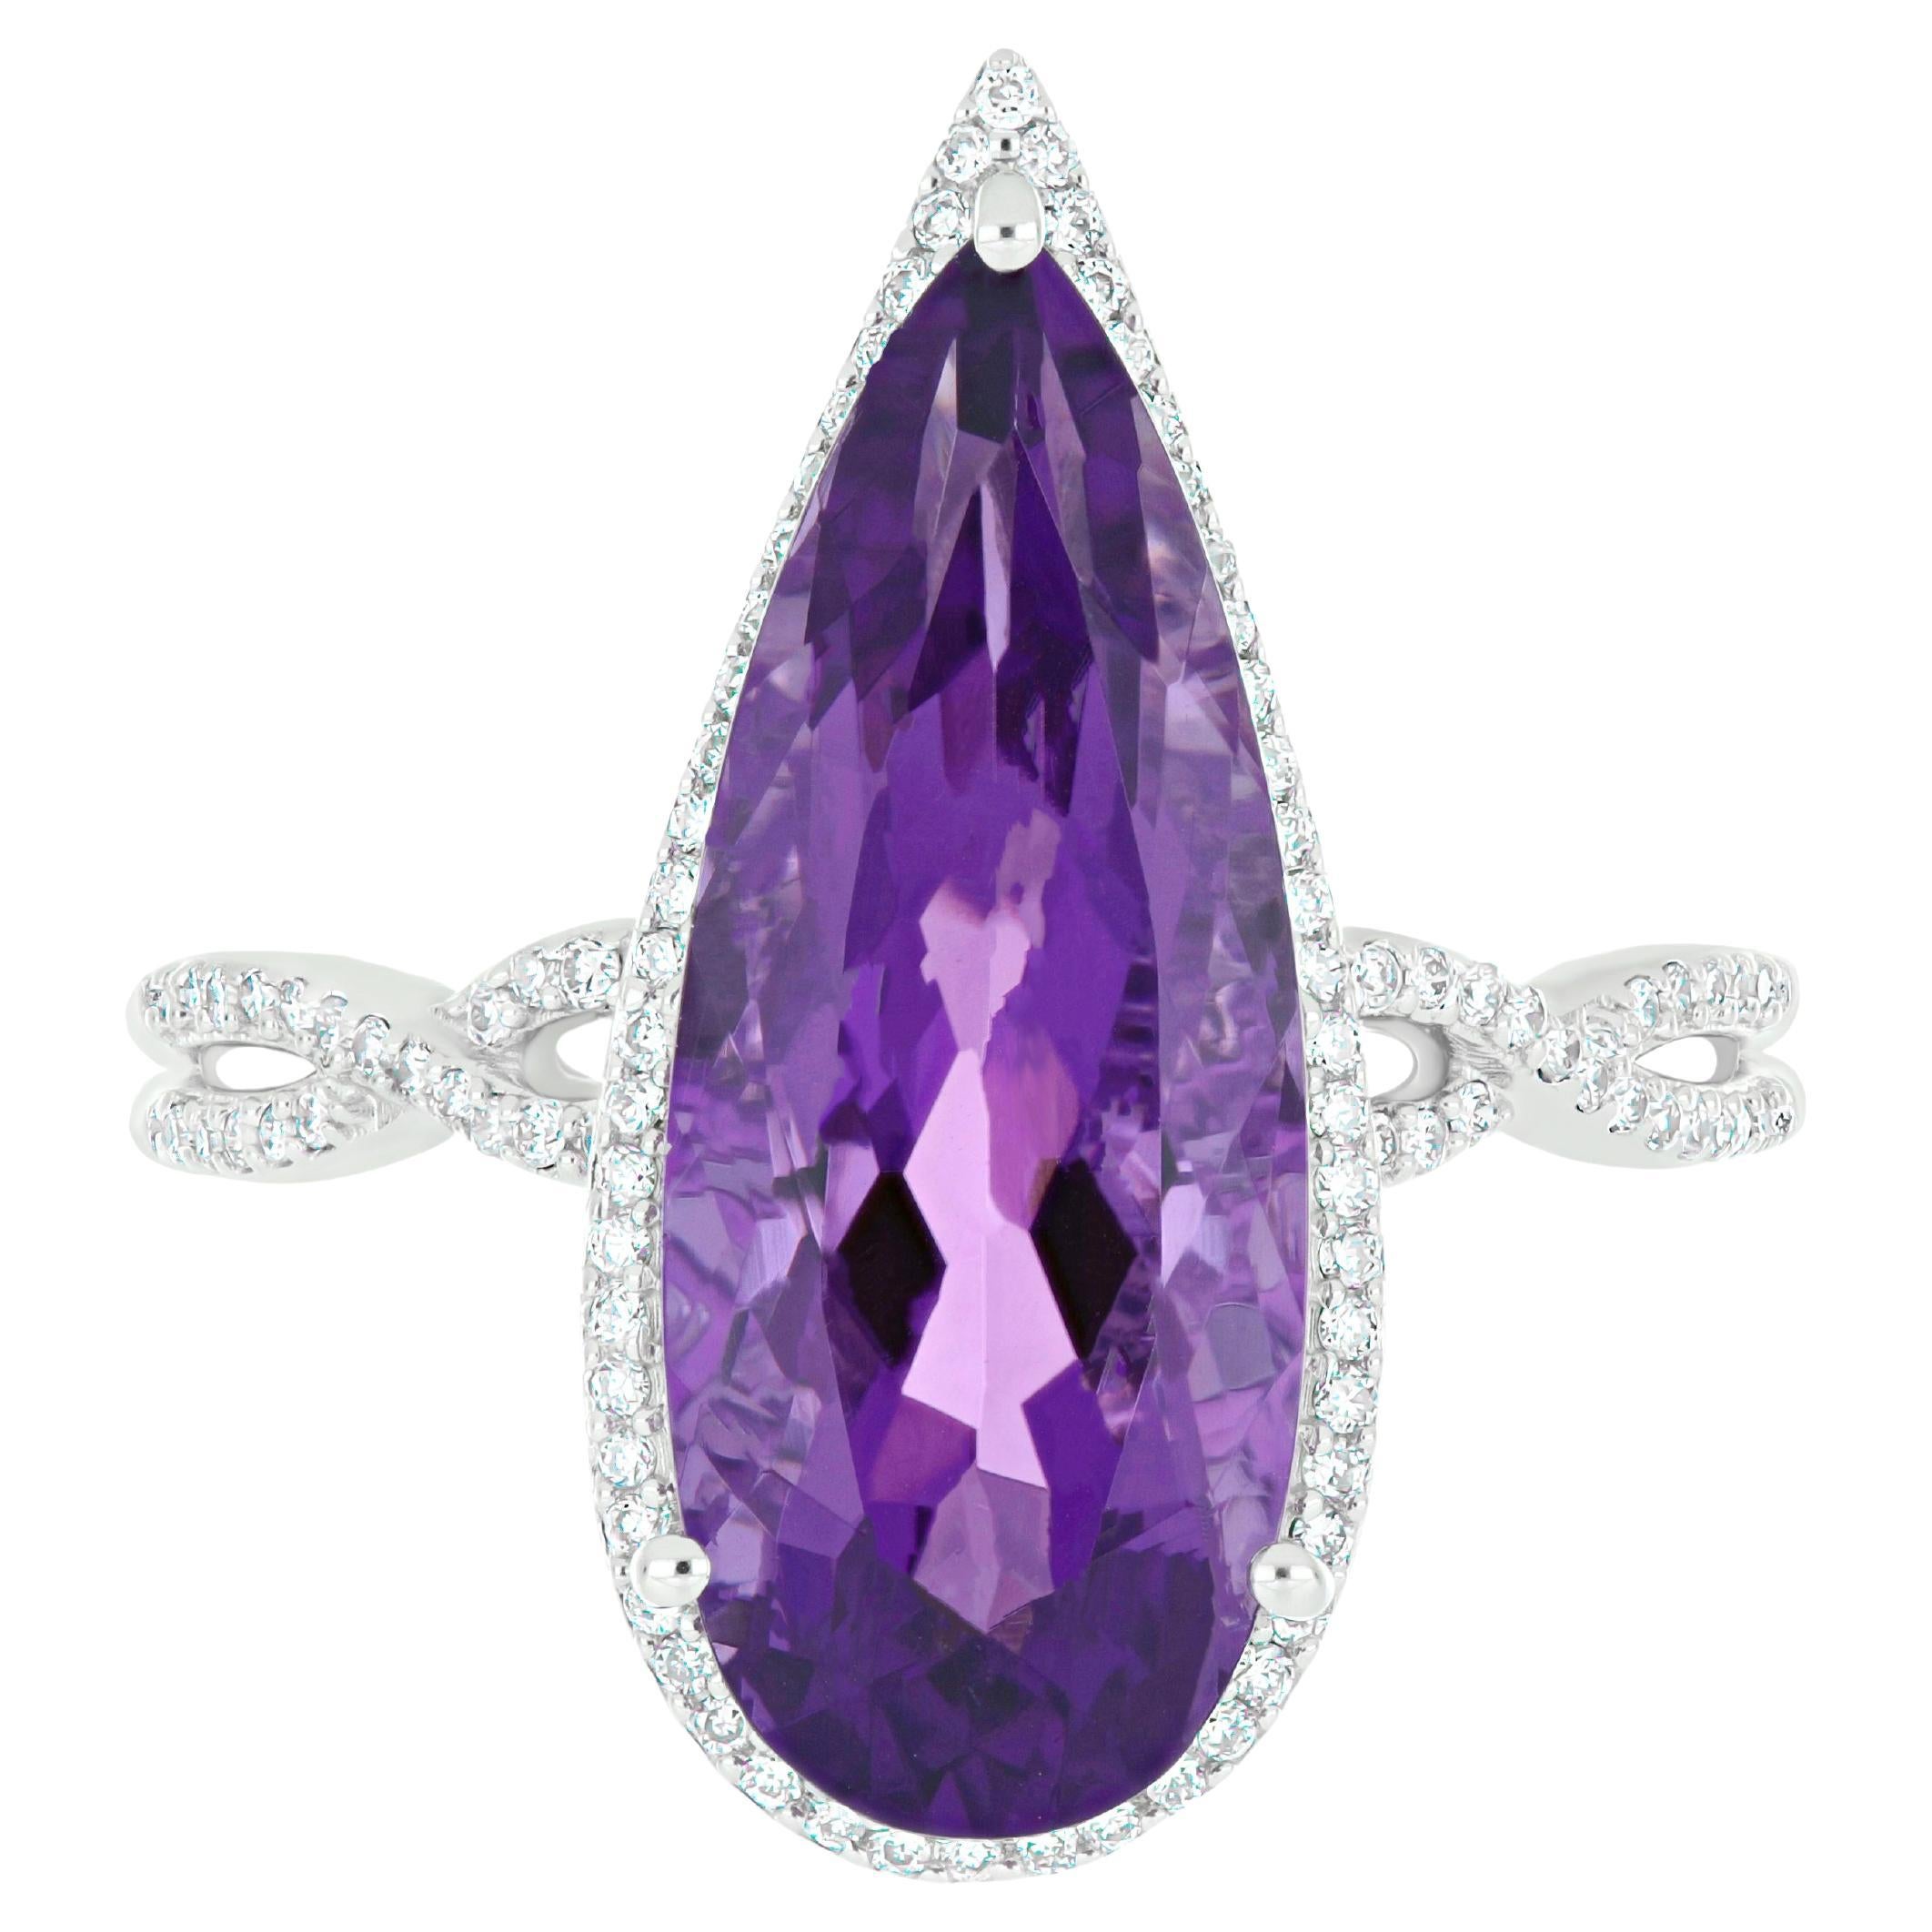 For Sale:  6.11 Carat Amethyst and Diamond Ring in 14 Karat White Gold Ring